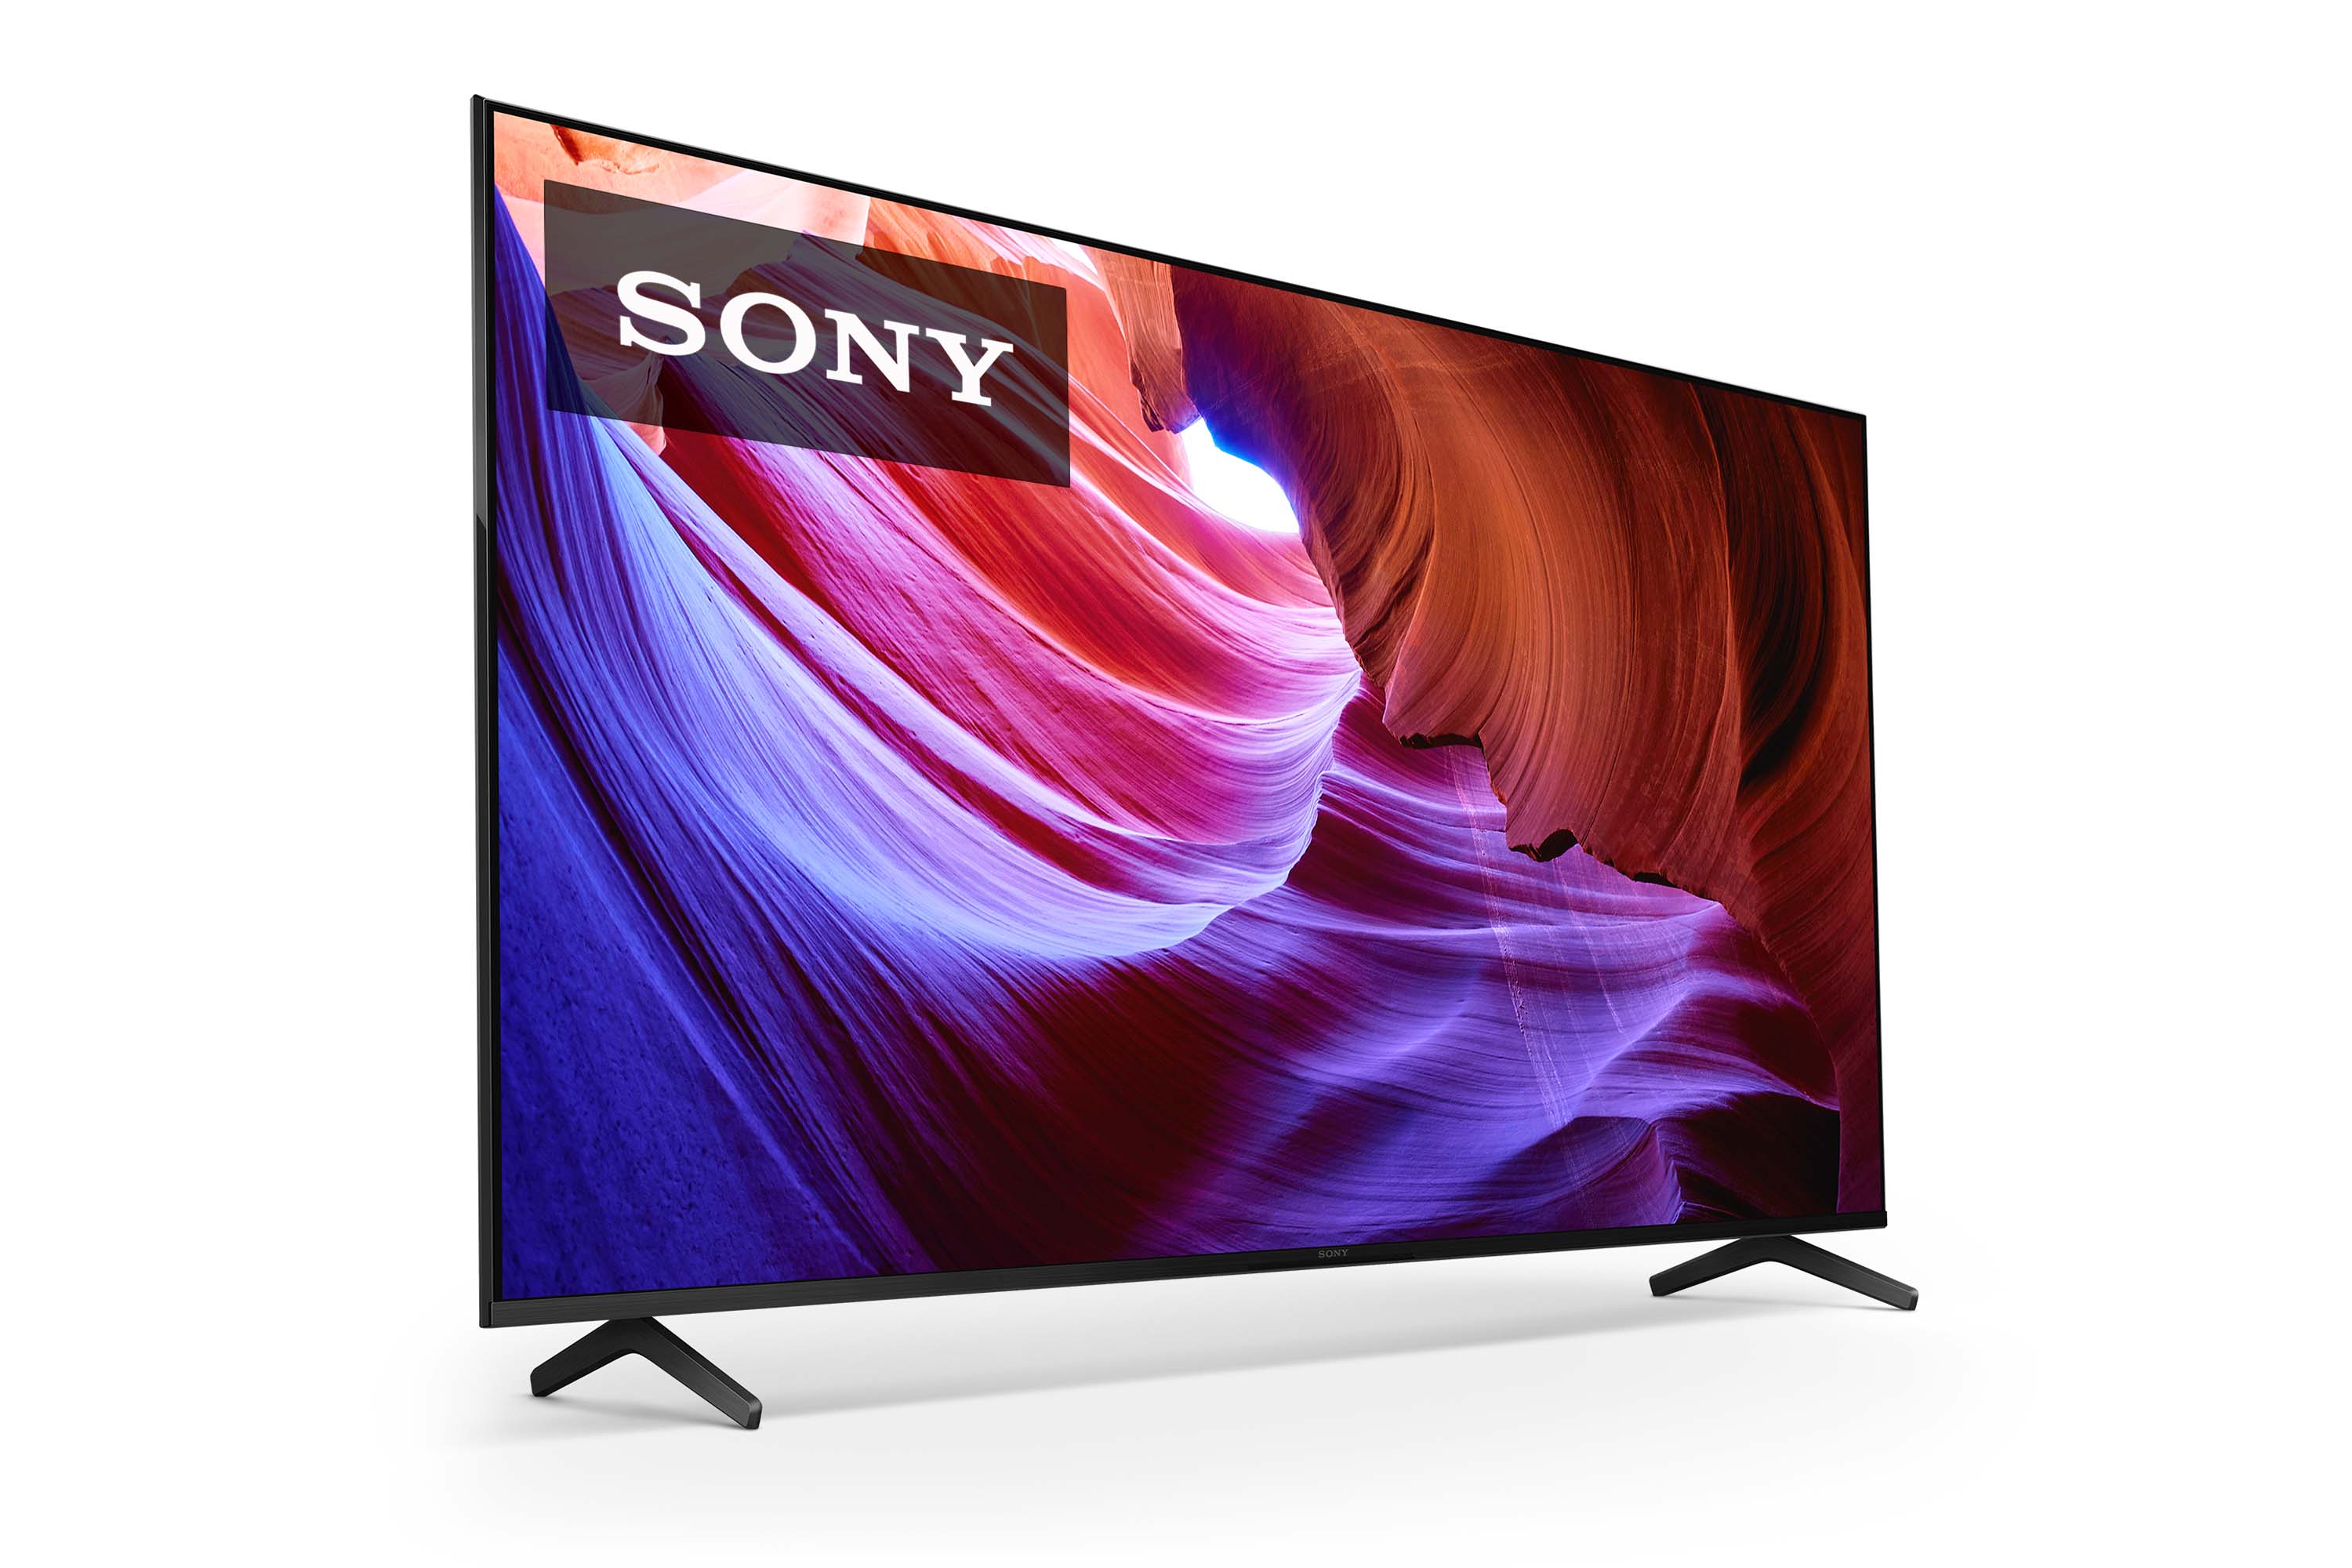 Sony KD X85K Series 4K ULTRA HD LED TV with XR Cognitive Intelligence Processor